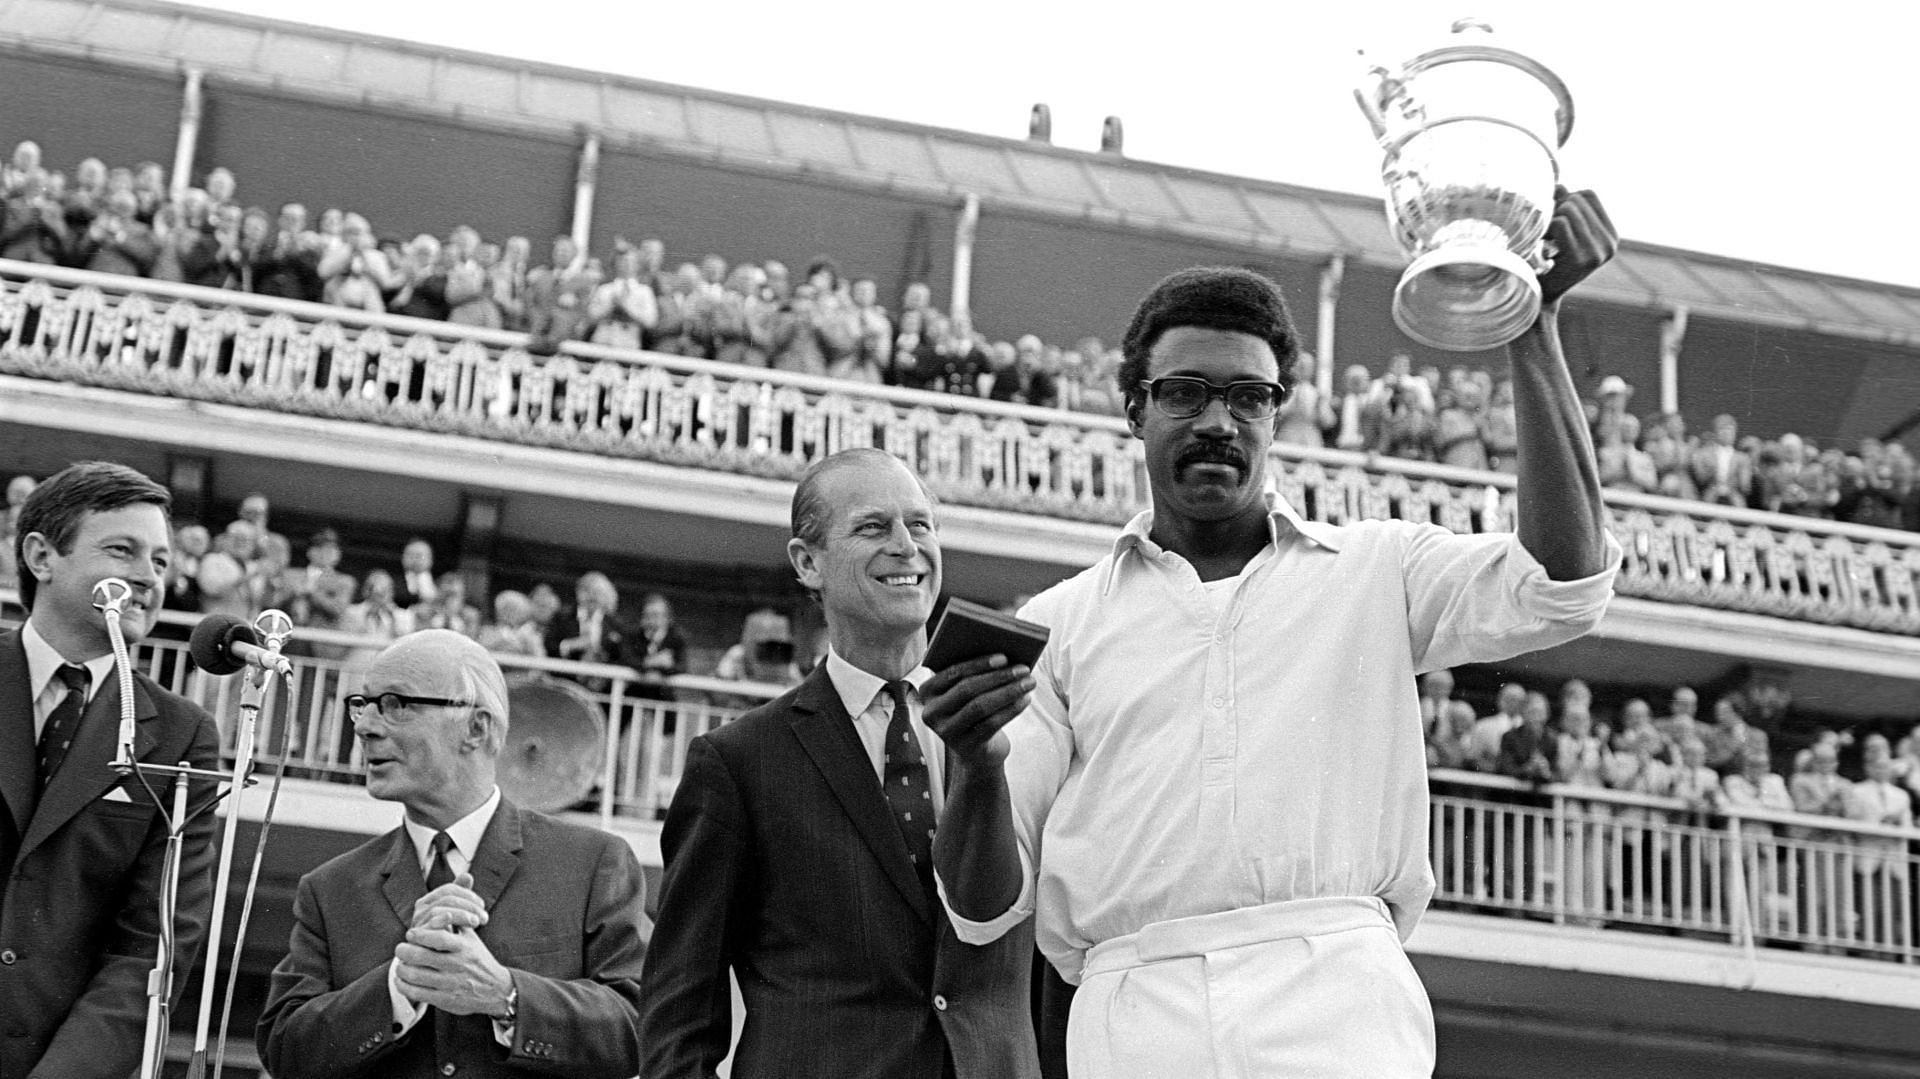 Clive Lloyd captained West Indies to glory in the 1975 World Cup final.